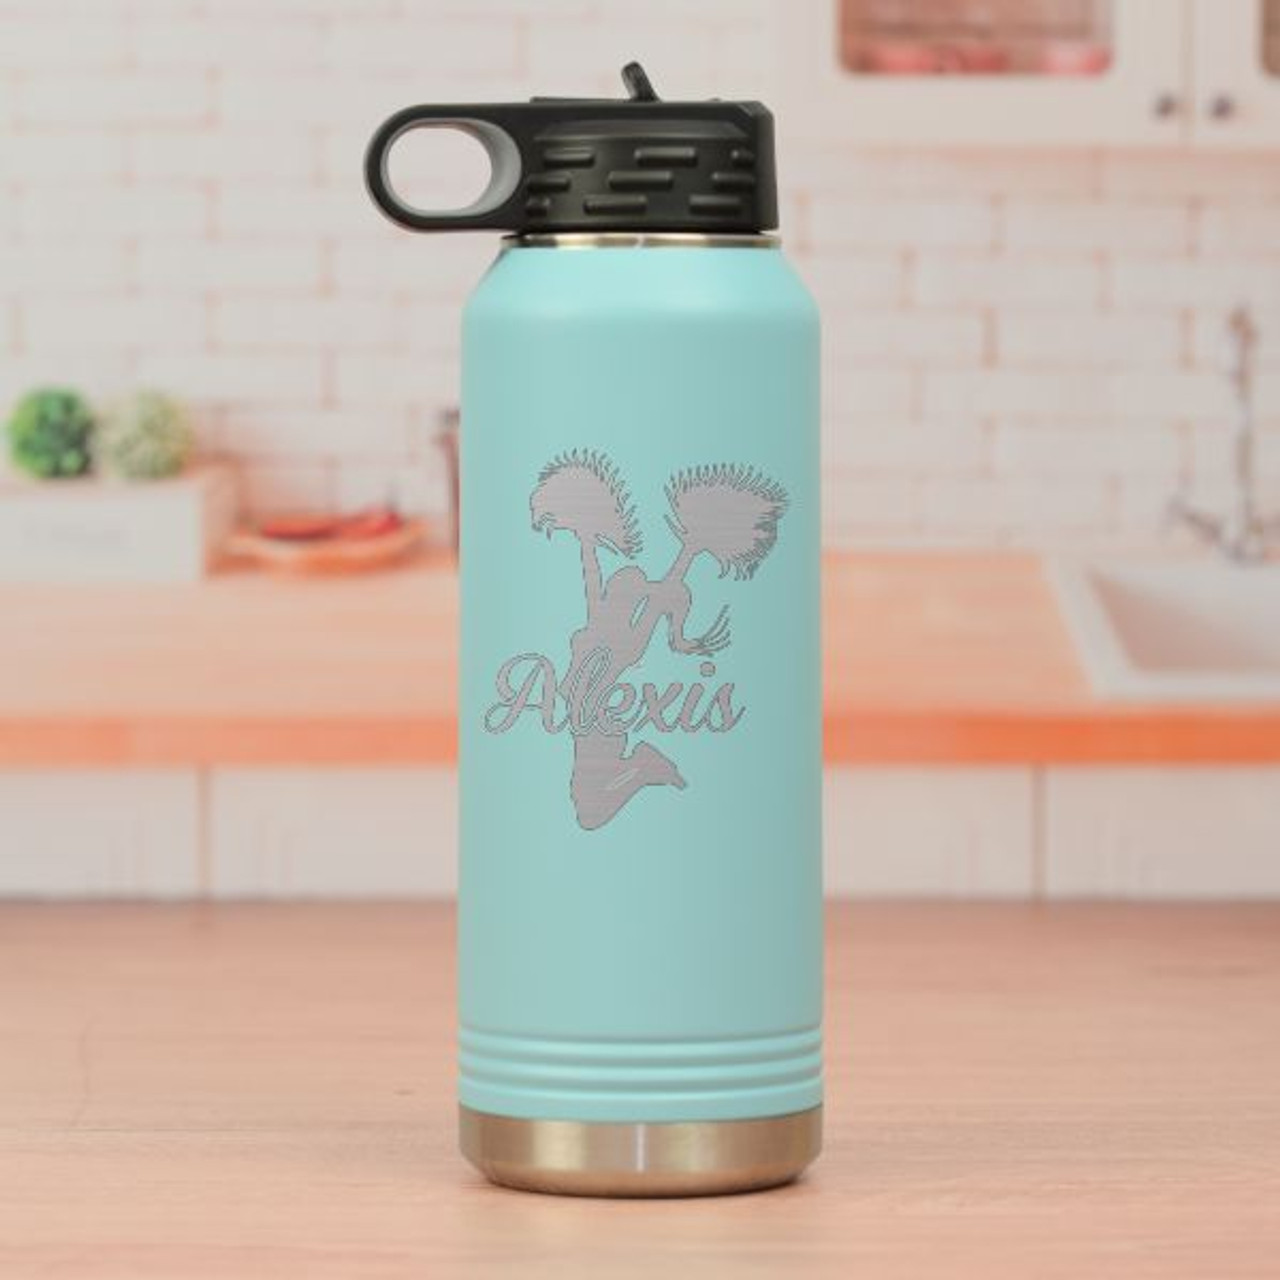 https://cdn11.bigcommerce.com/s-mdwz5t7wme/images/stencil/1280x1280/products/1655/6264/DW5077-Cheerleader-waterbottle__08982.1700691255.jpg?c=2?imbypass=on